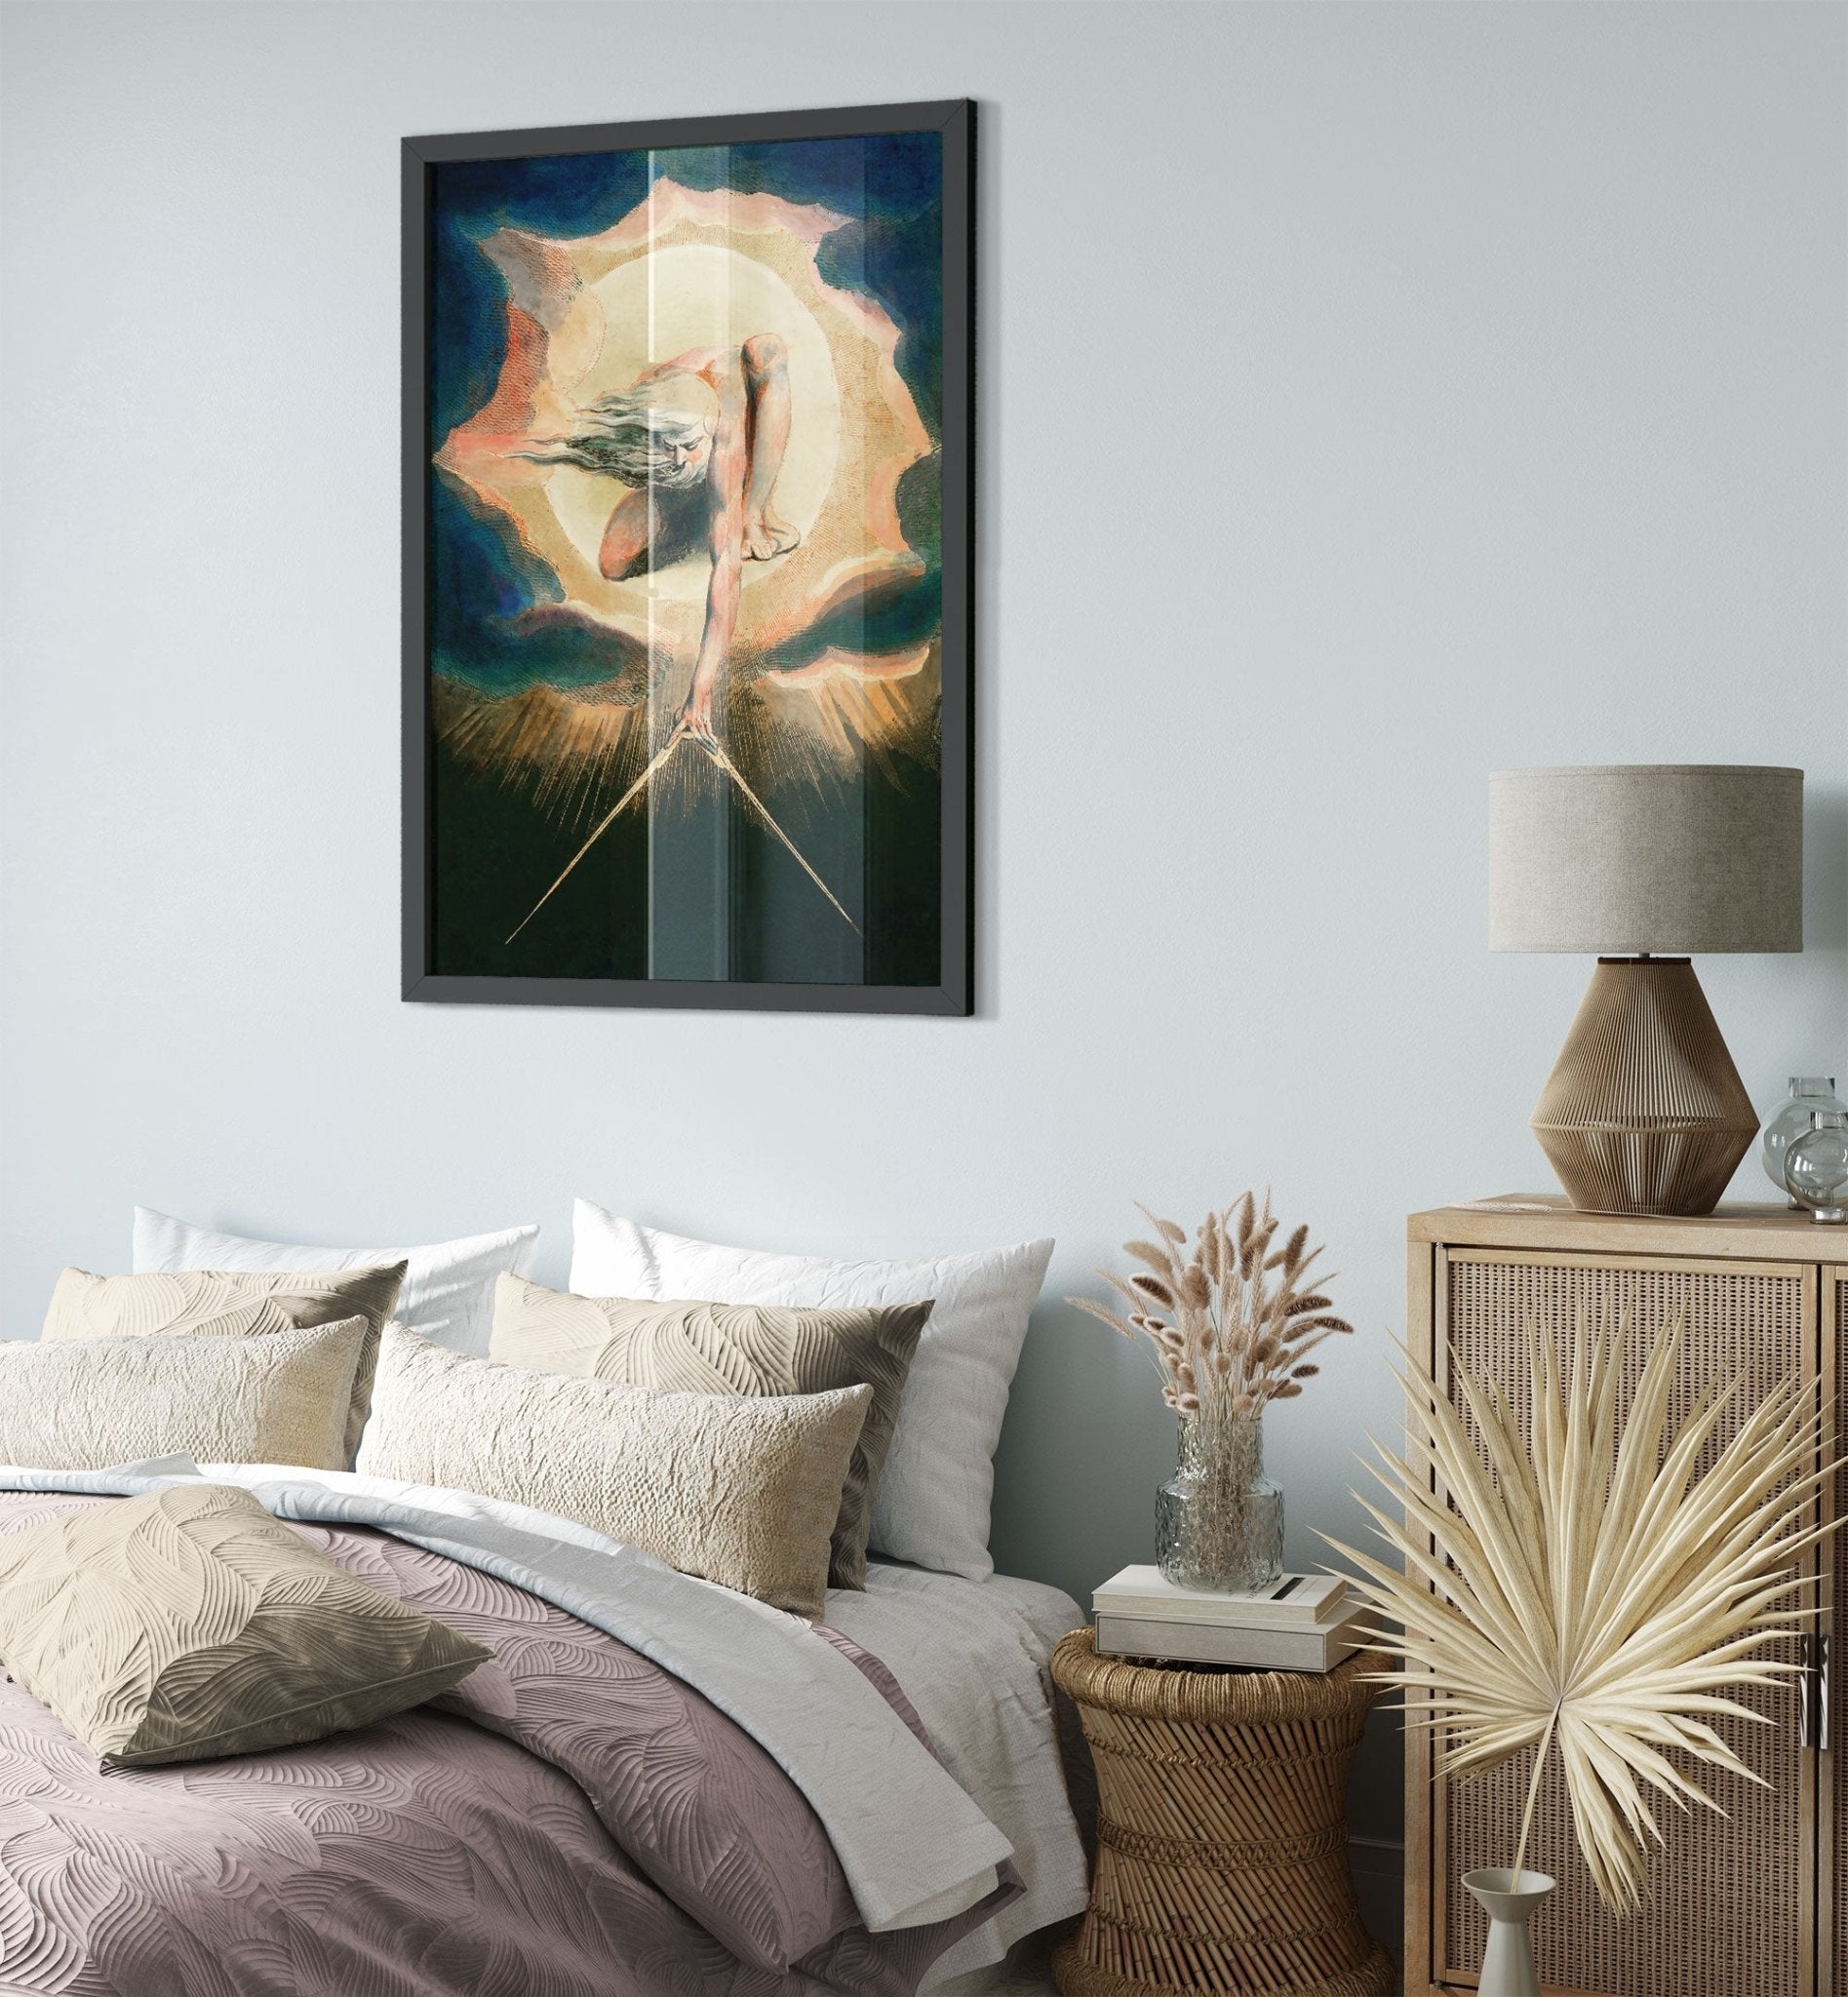 William Blake Framed Print, Ancient Of Days - William Blake Print - Urizen With Compass Imposes Rational Order - WallArtPrints4U